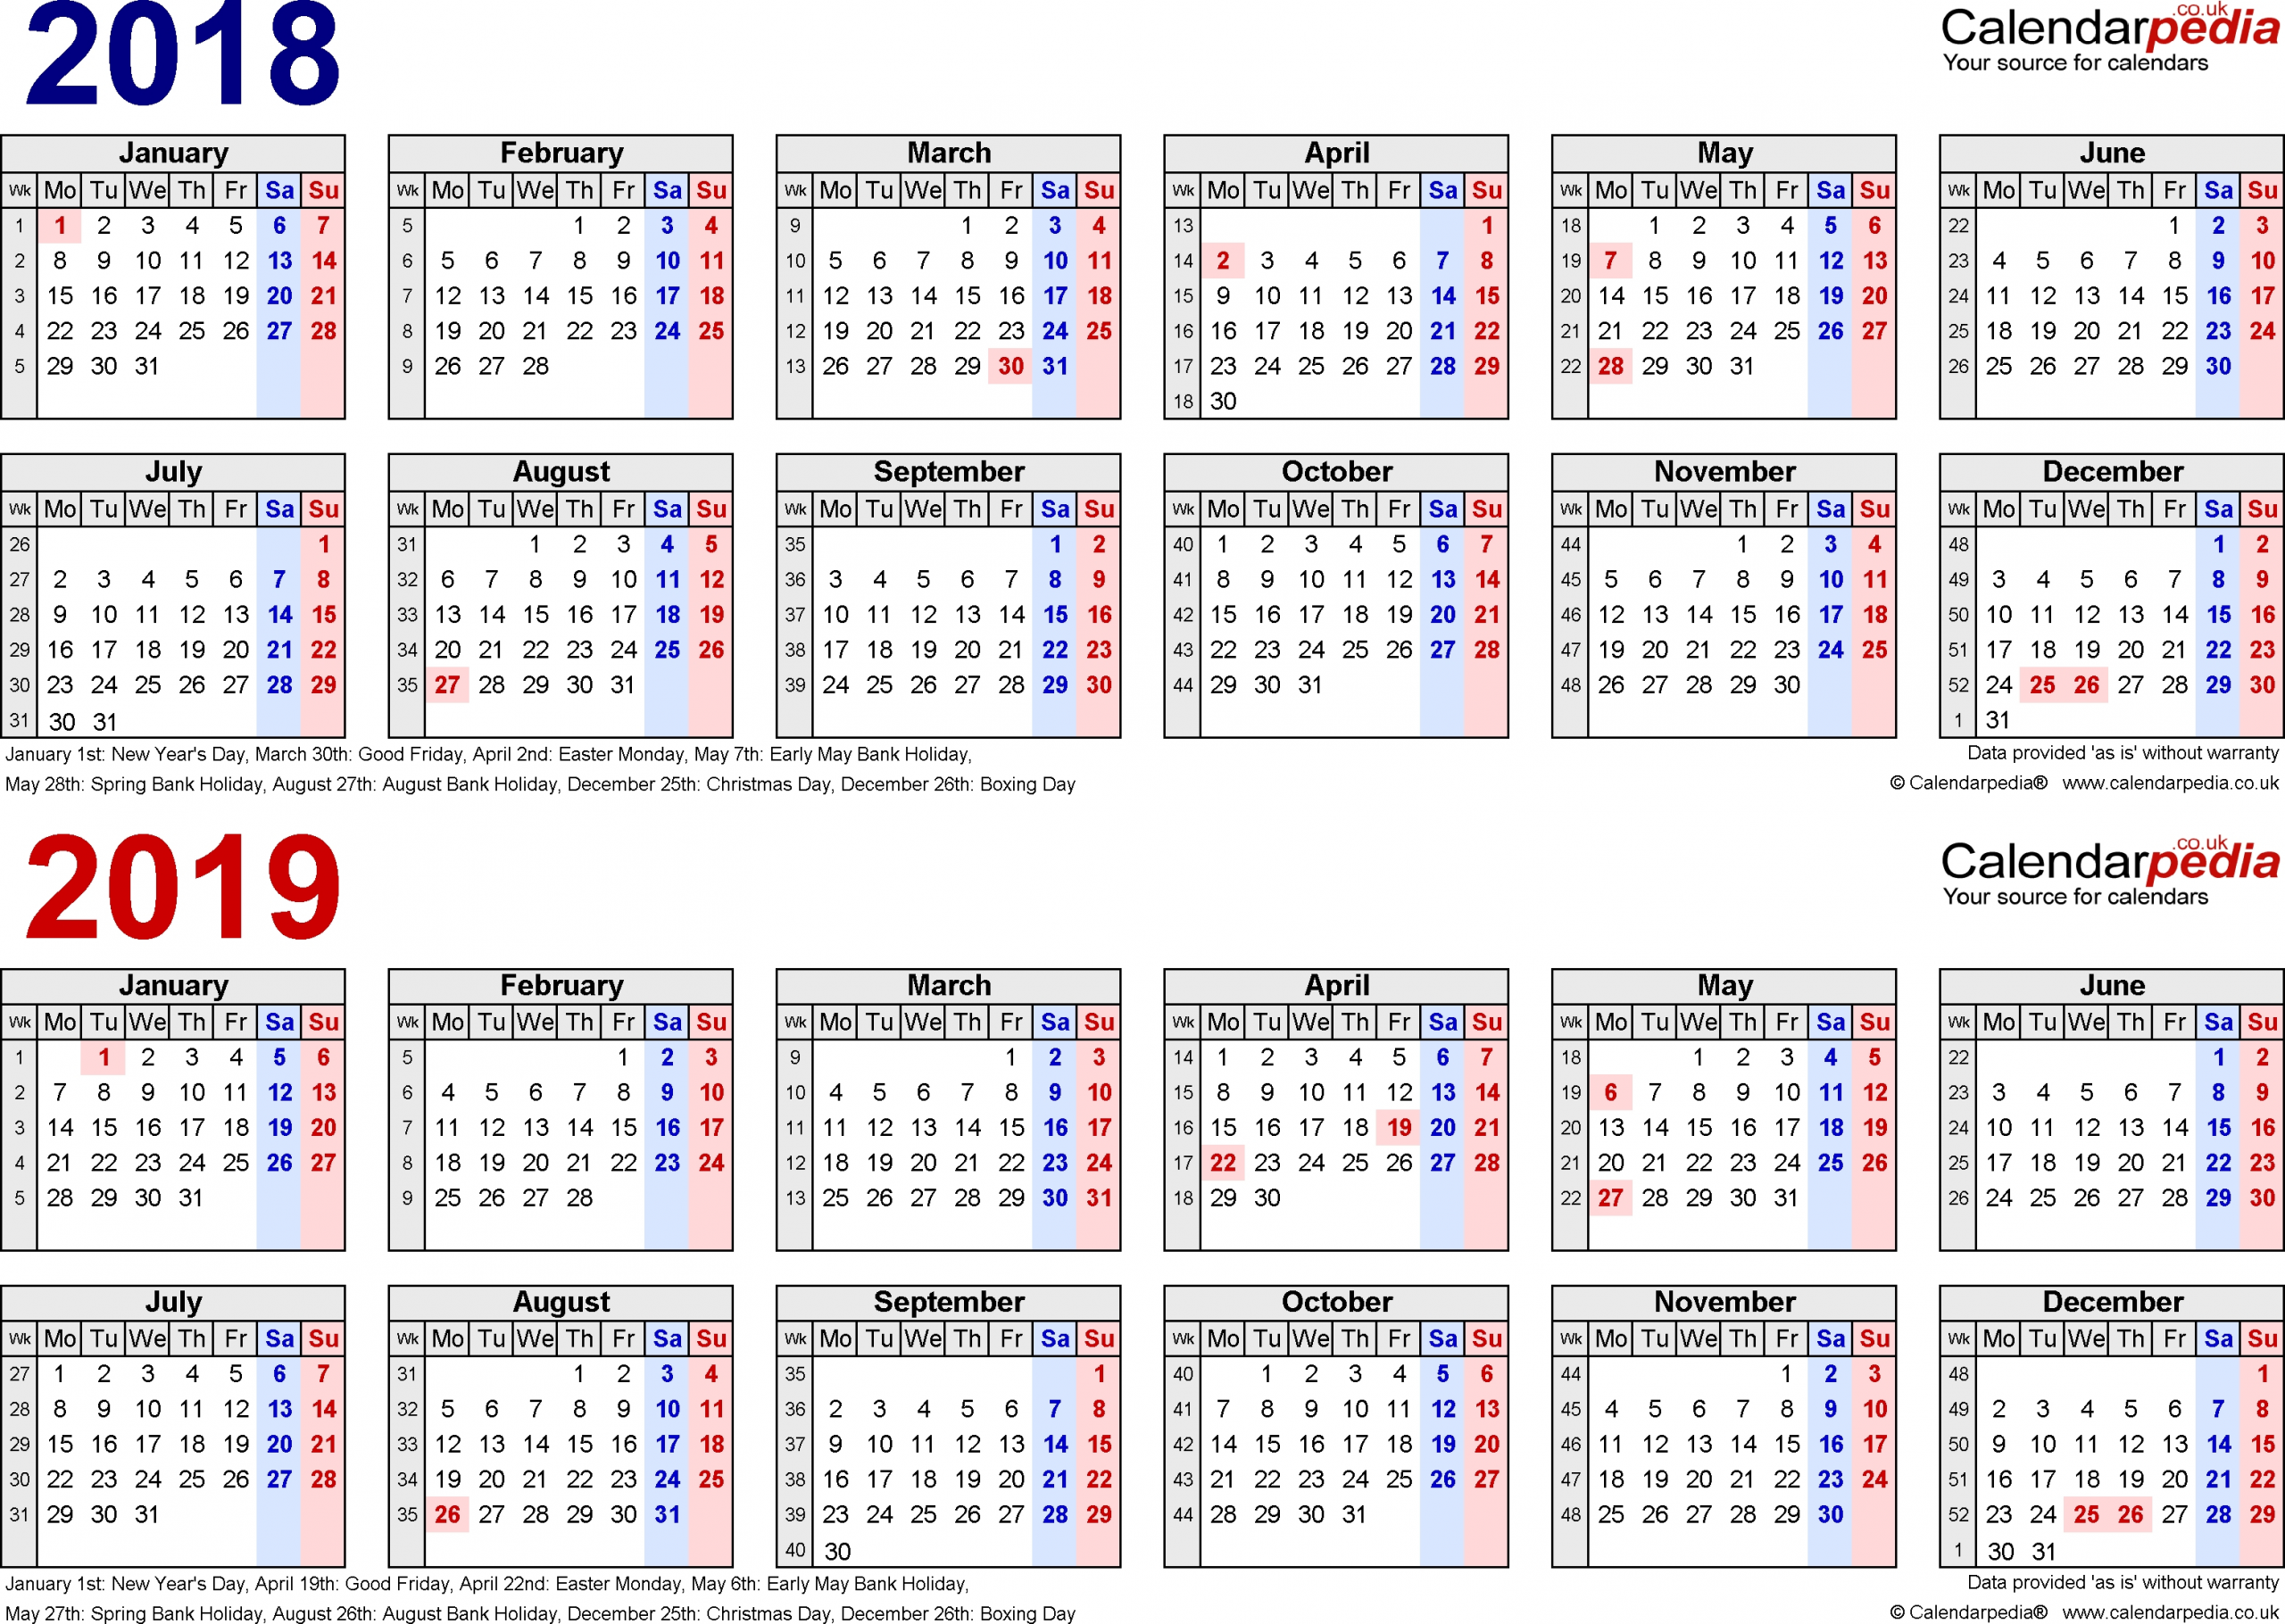 Two Year Calendars For 2018 2019 Uk For Pdf Qualads